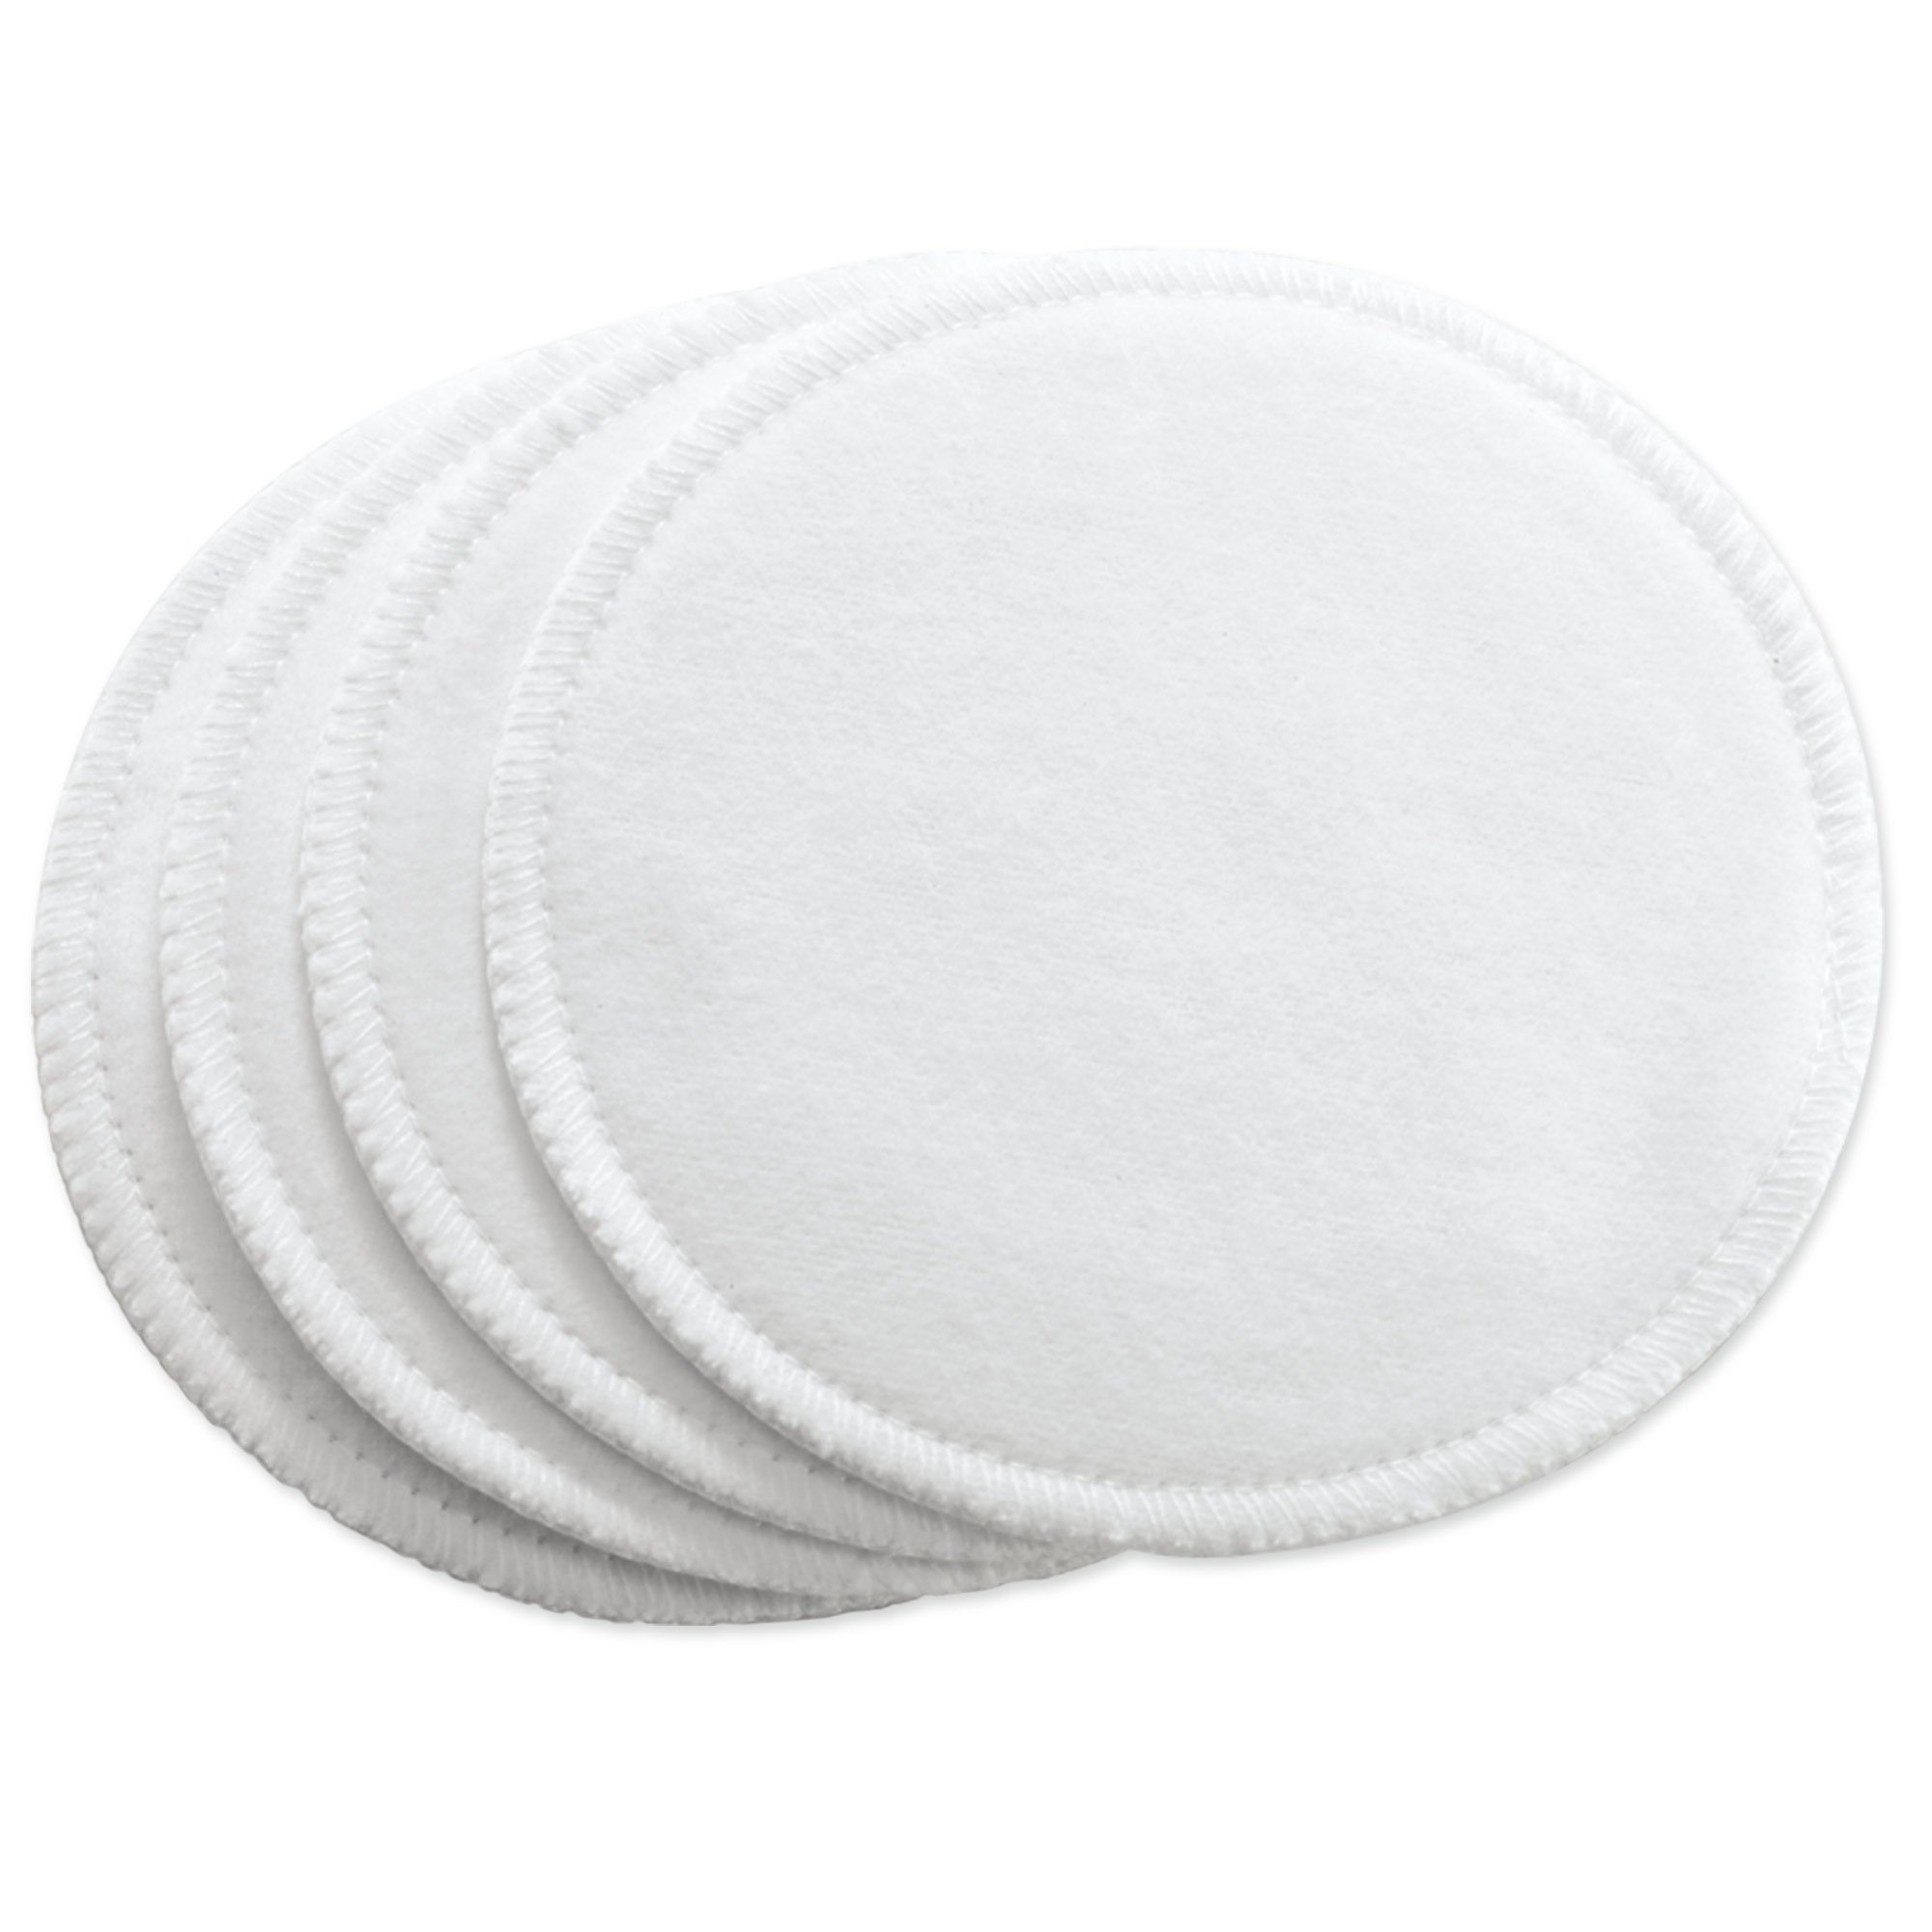 Dr Browns Washasble Bra Pad (4-pck)